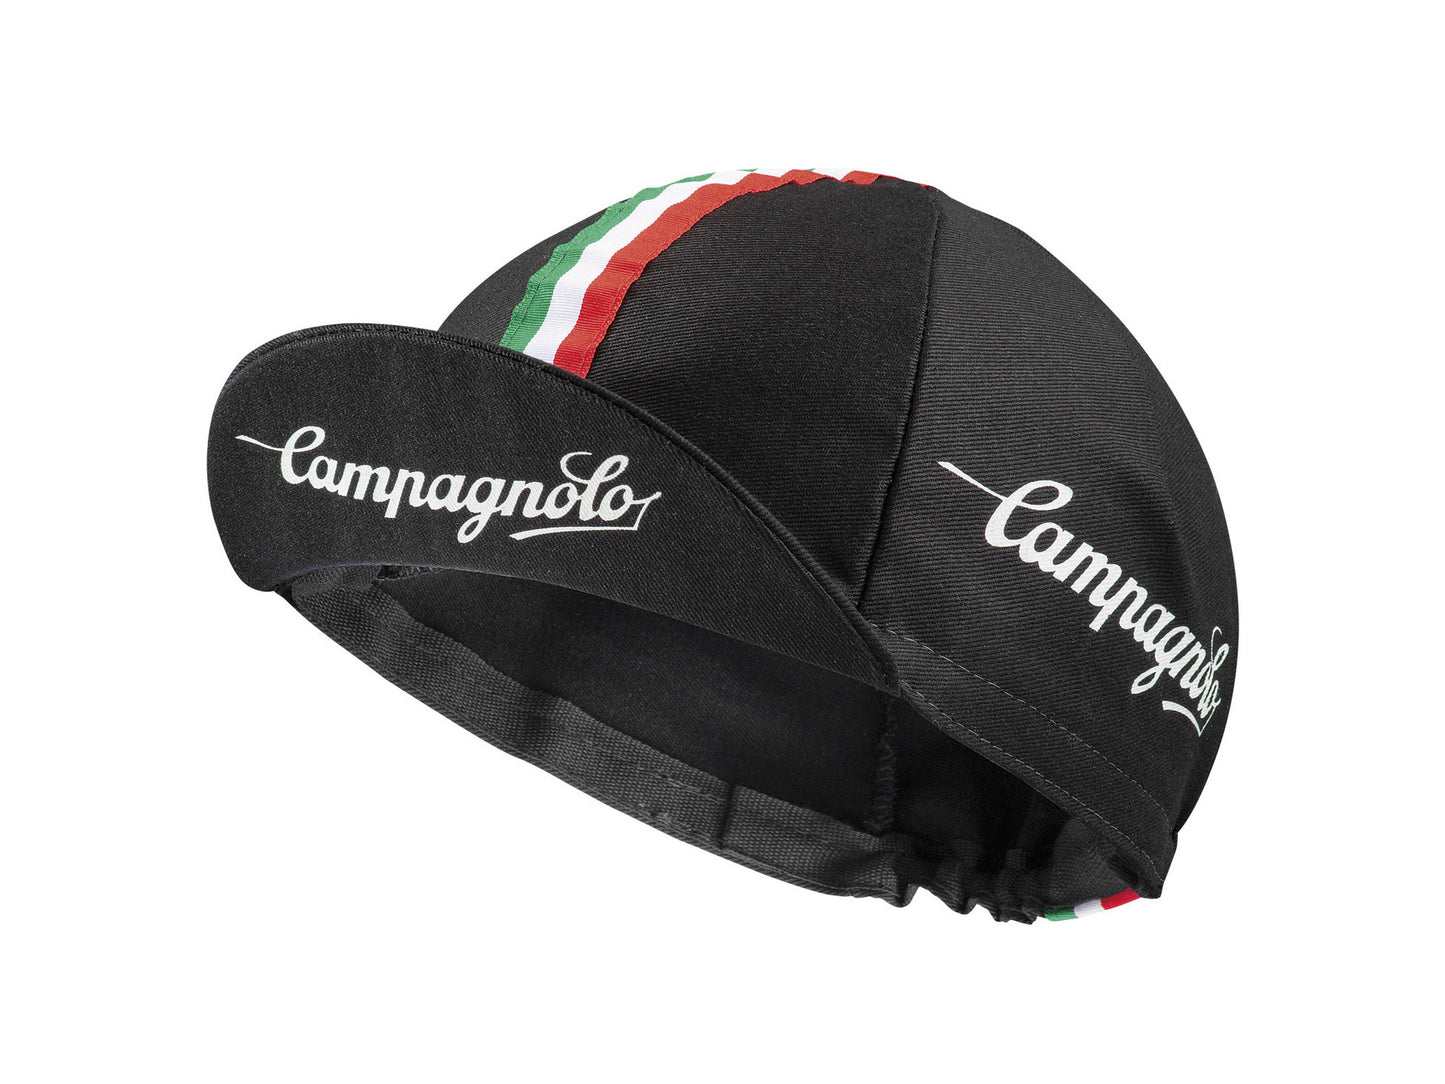 Campagnolo Classic Cycling  Cap Black w/Italian stripes, one size